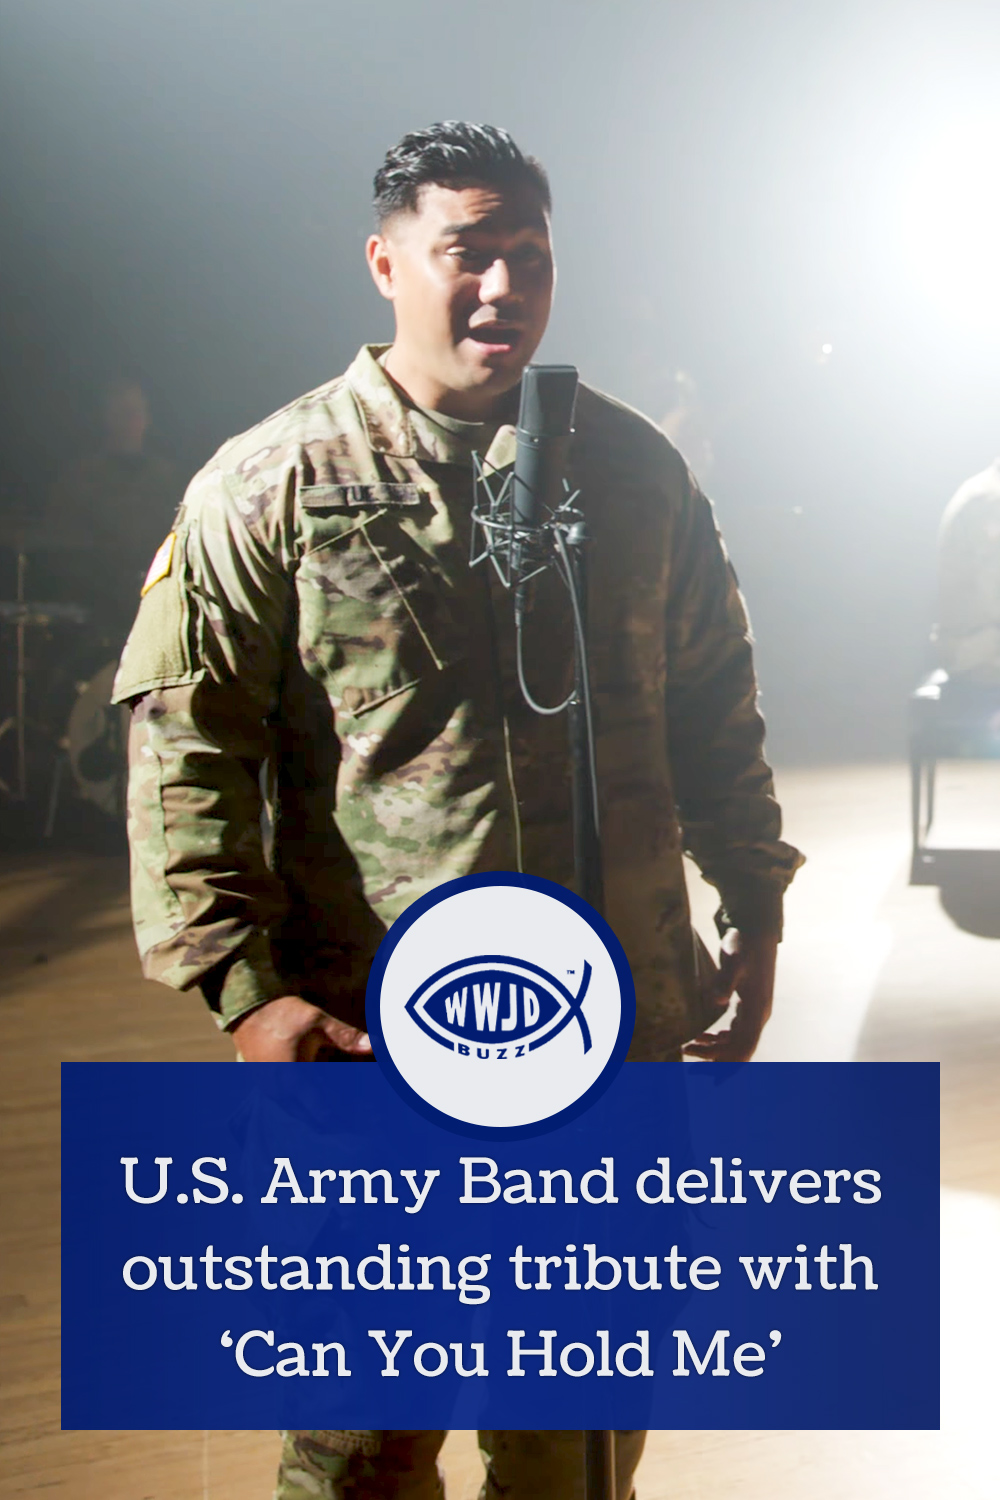 U.S. Army Band delivers outstanding tribute with ‘Can You Hold Me’